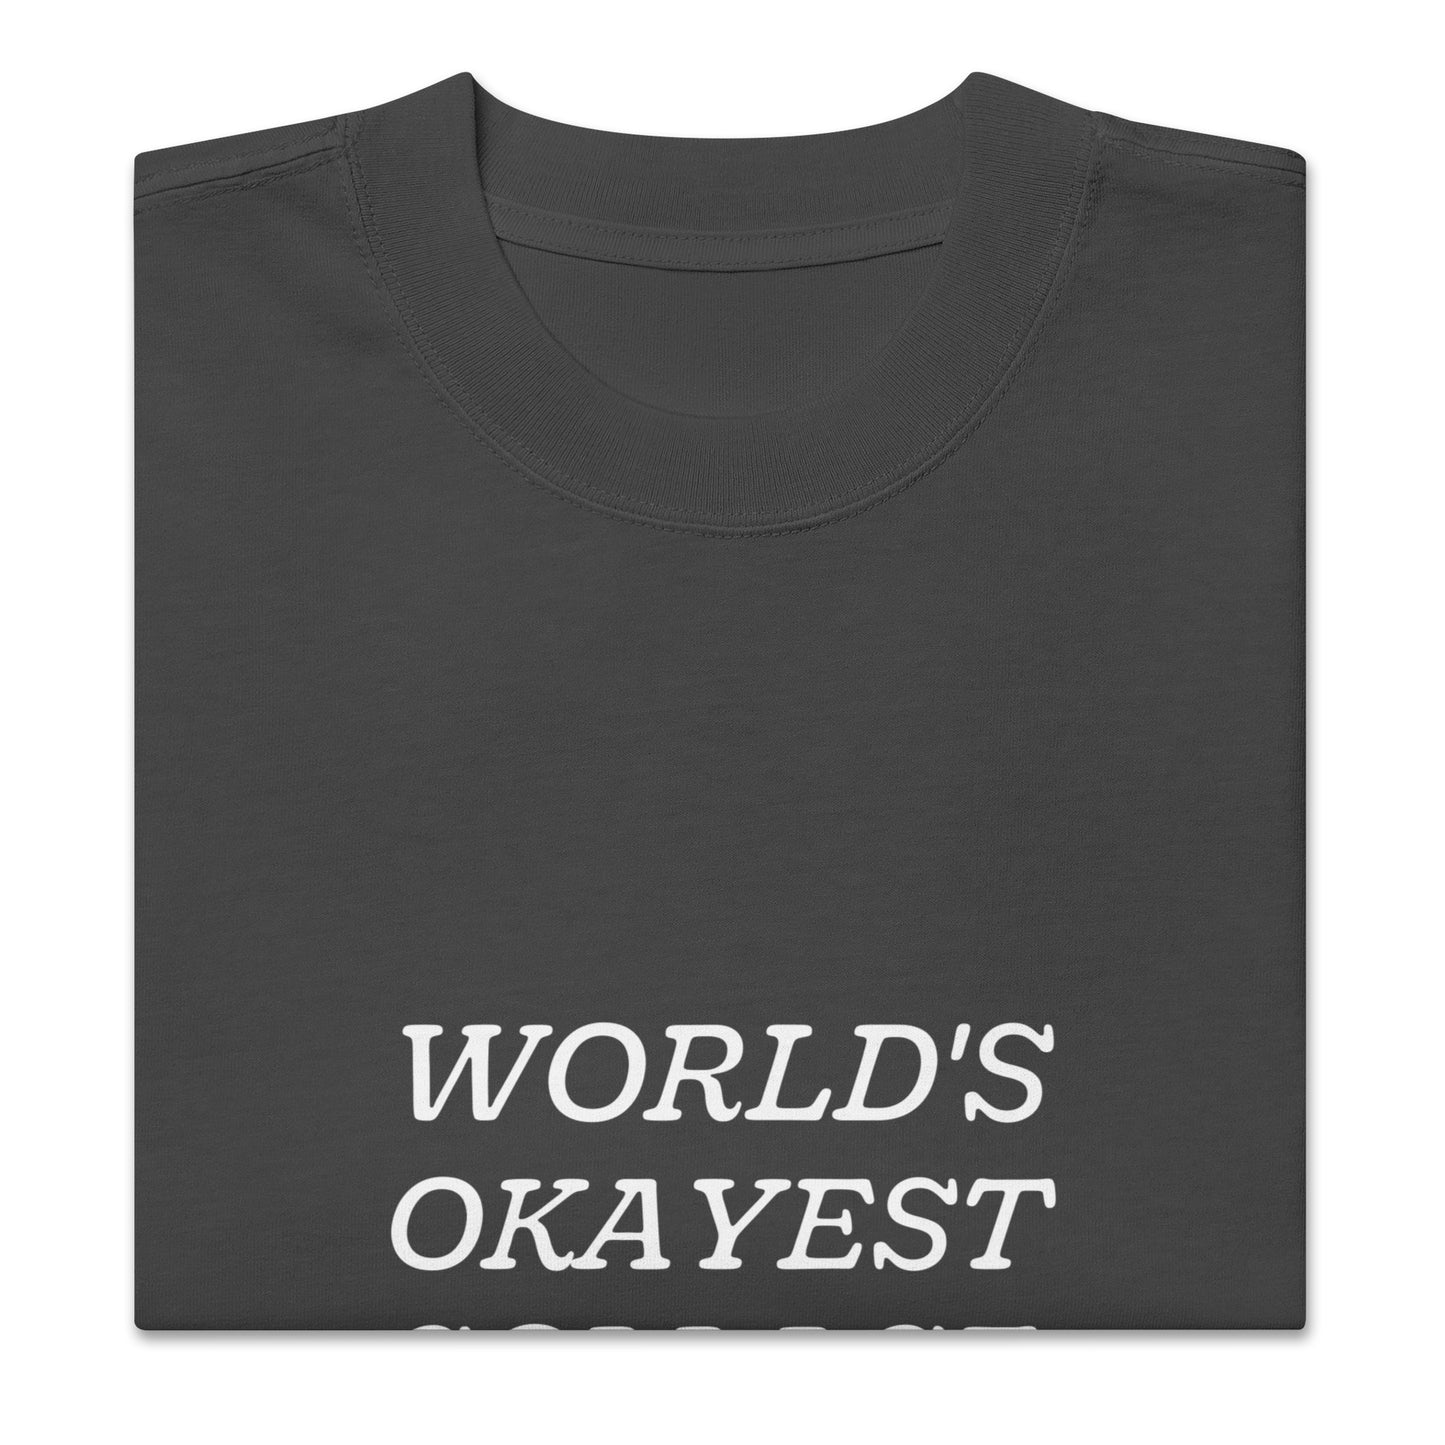 World's okayest collage artist! Oversized faded t-shirt